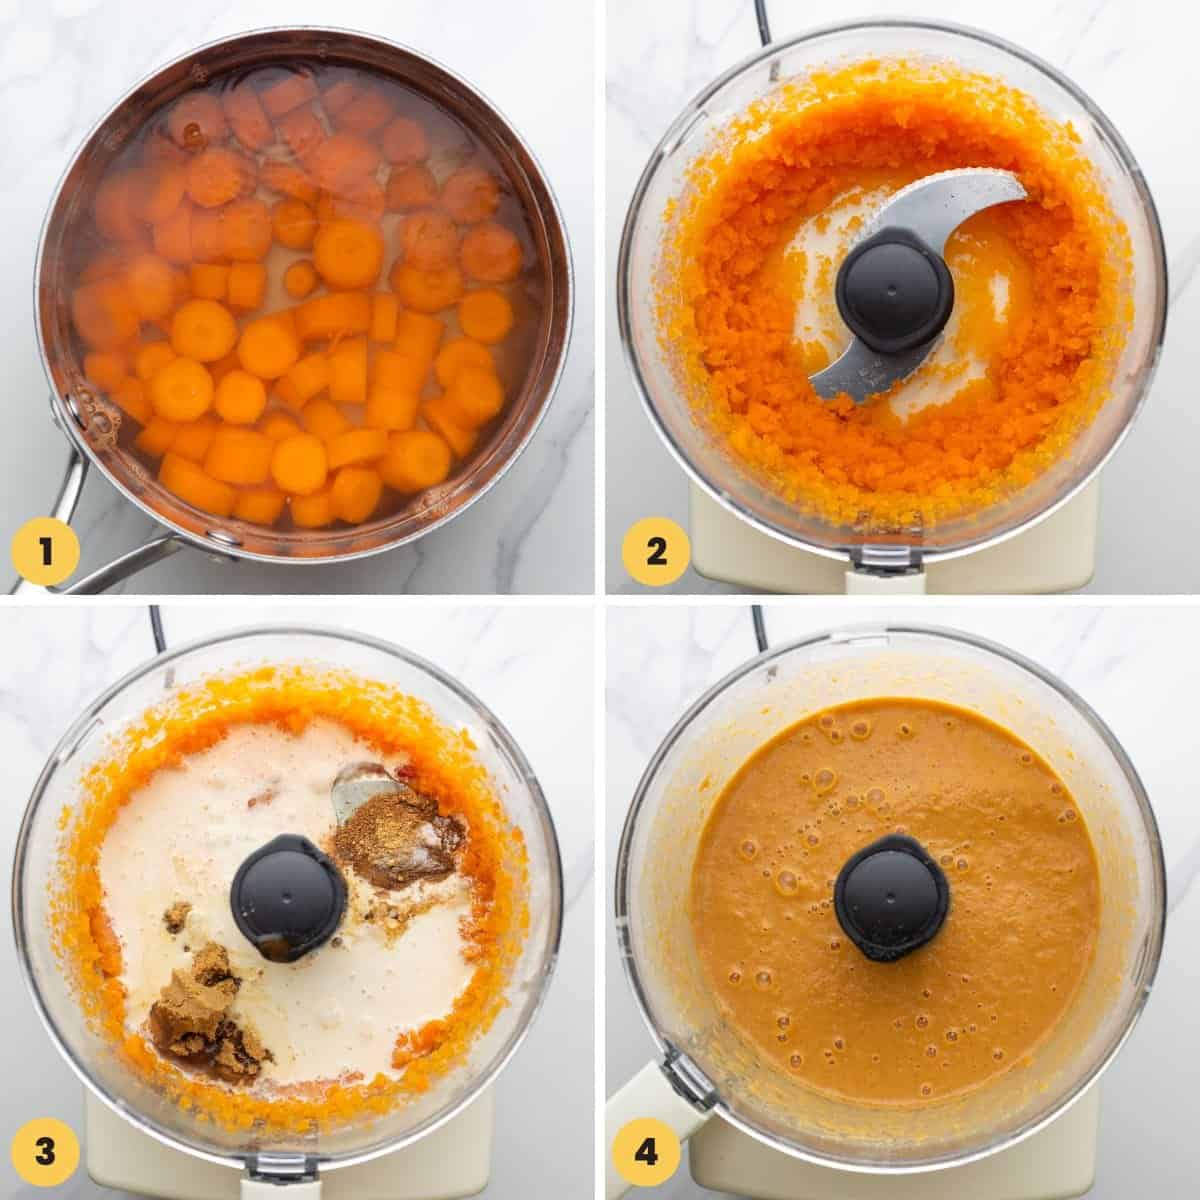 a collage of images showing how to make a pie filling with cooked carrots and a food processor.